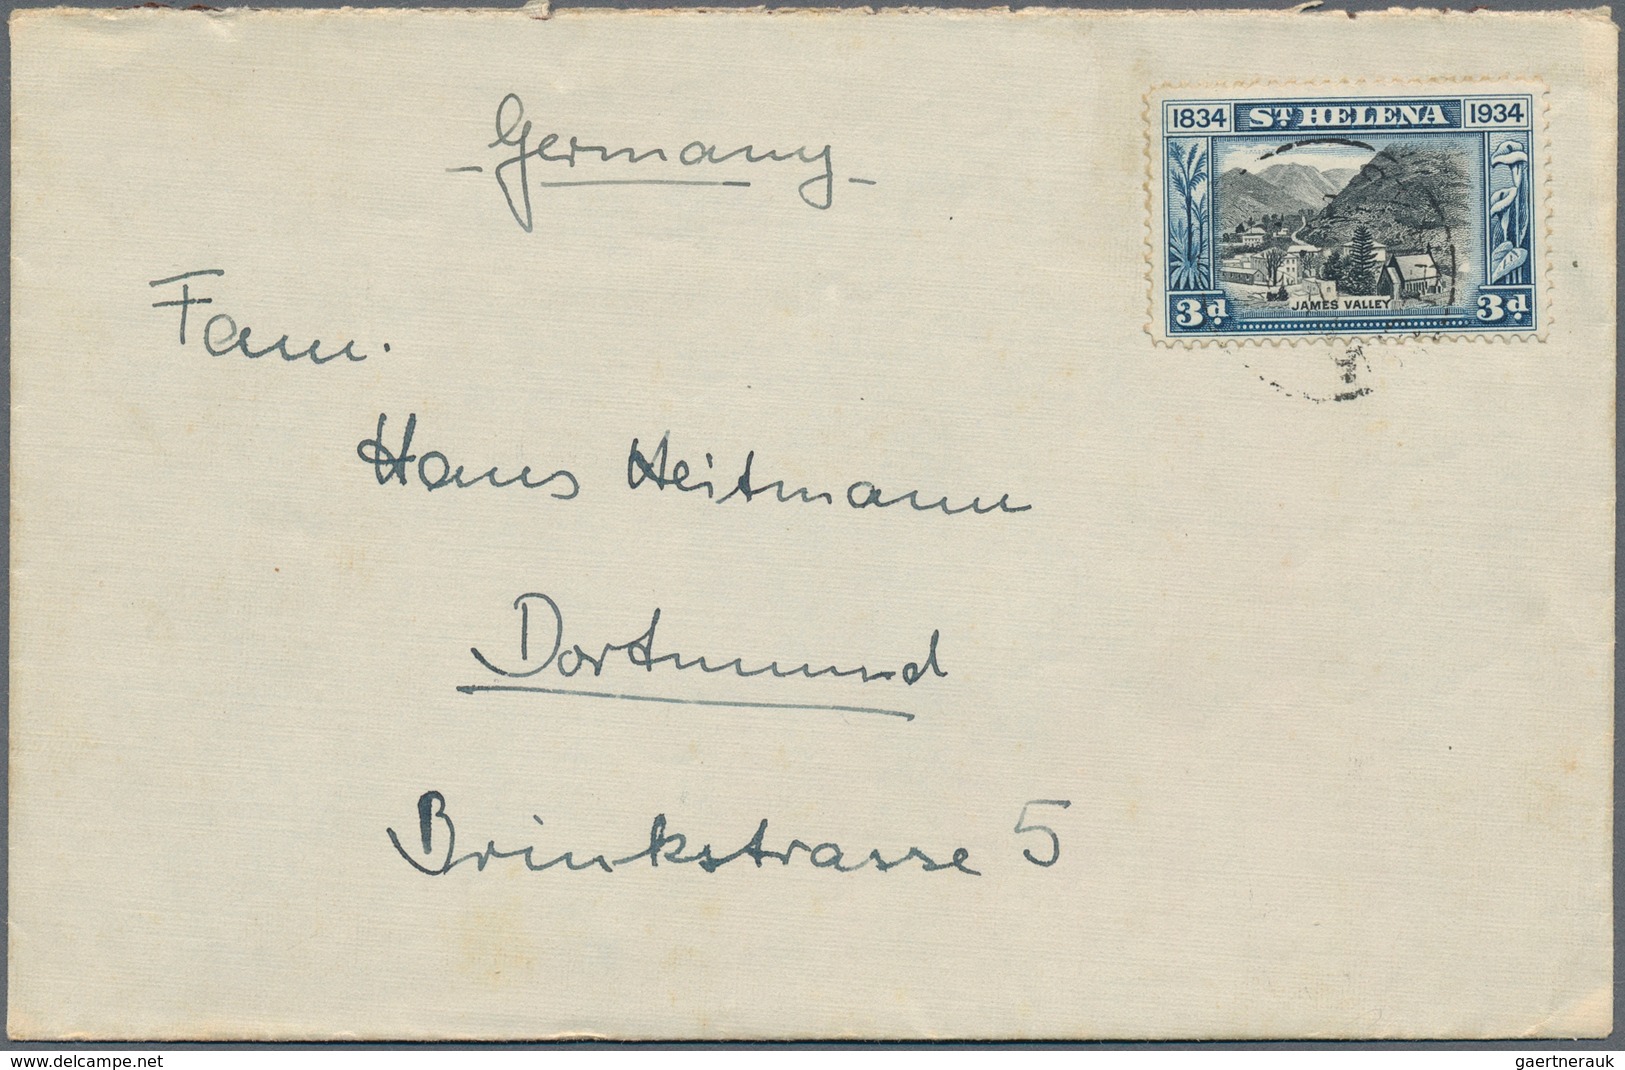 St. Helena: 1922-34 Two picture postcards and one cover to Germany with various frankings, plus 1934